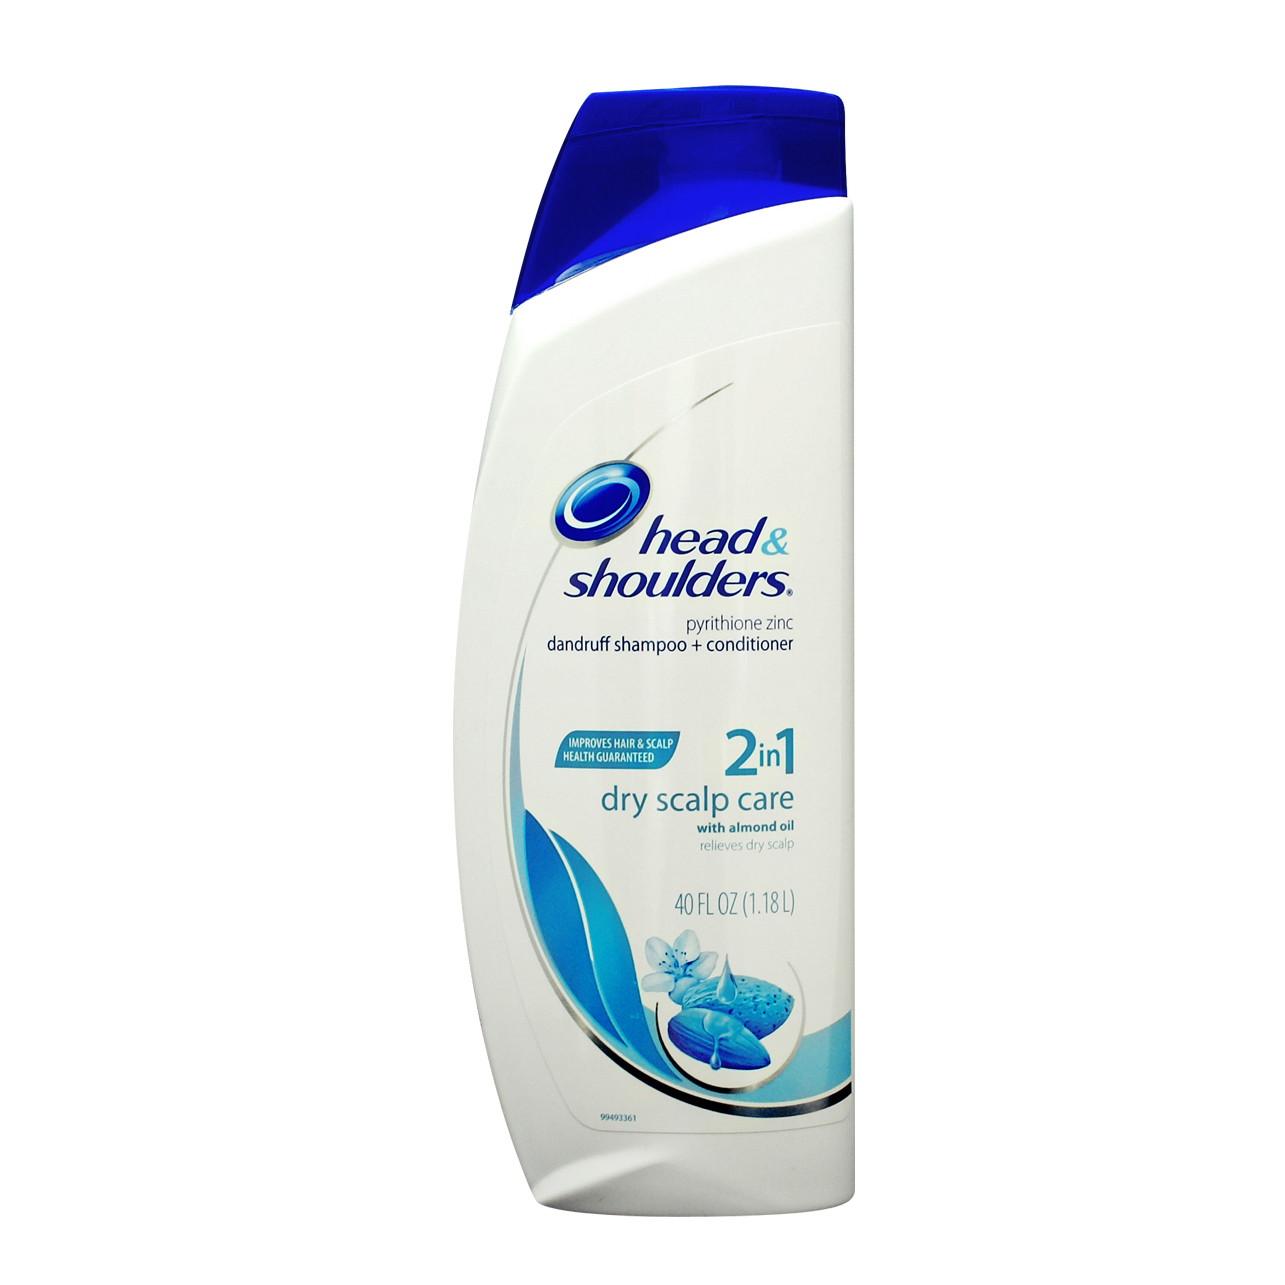 Head and shoulders 2 in 1